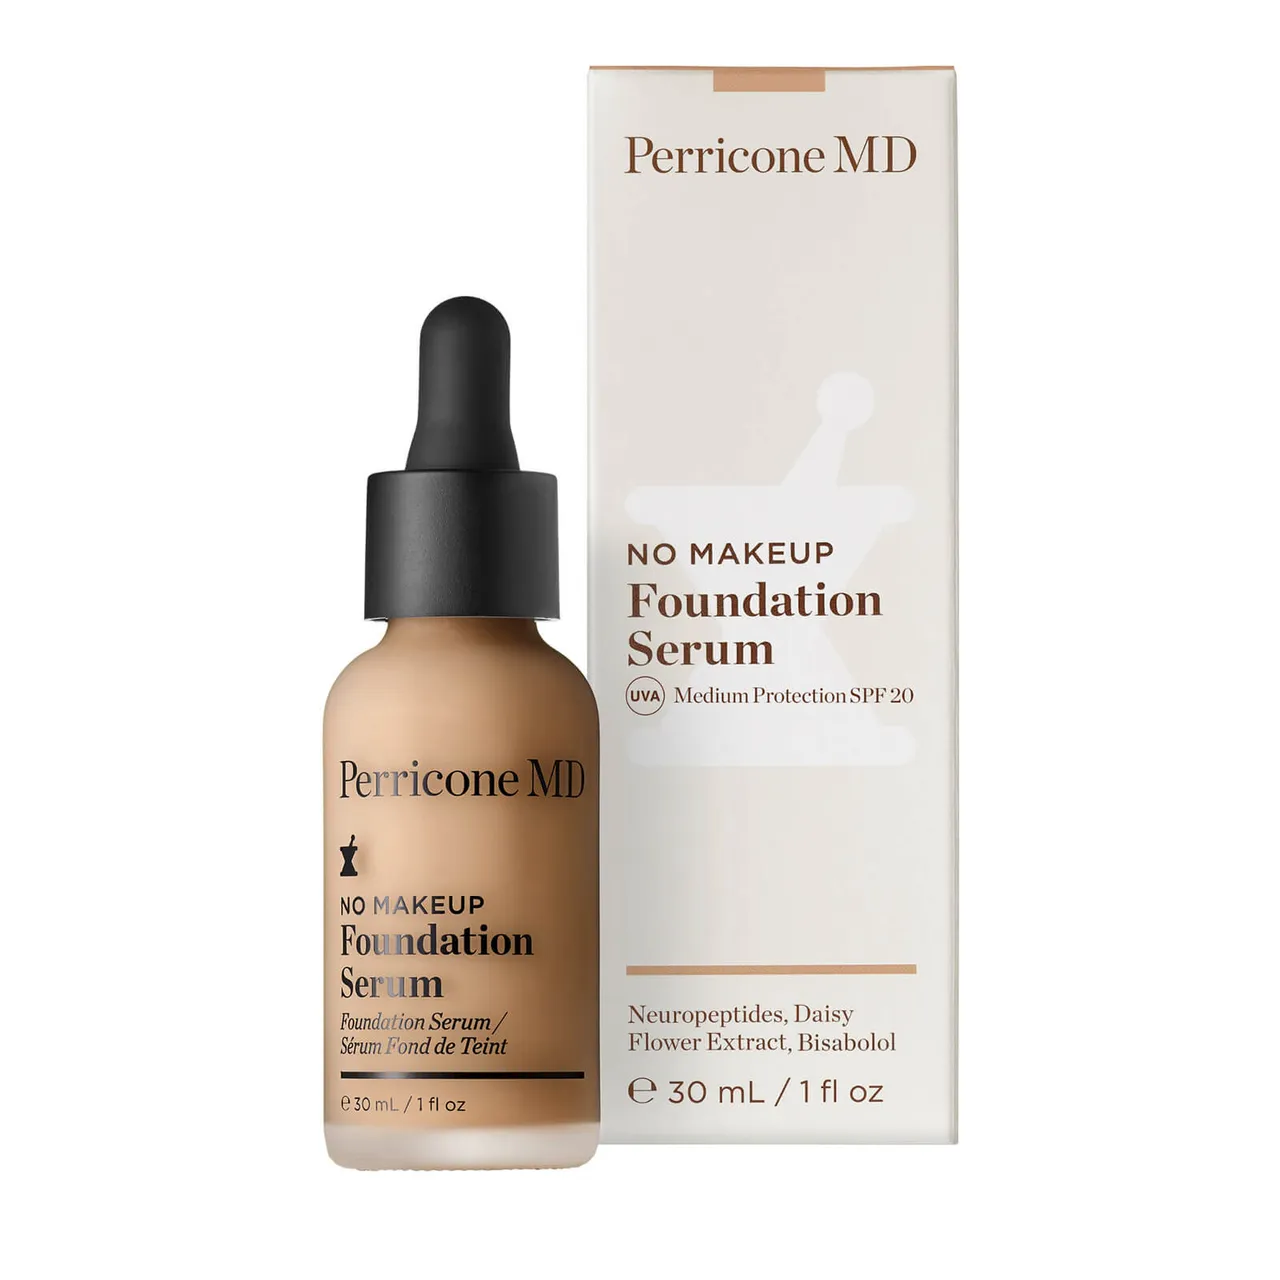 Perricone MD No Makeup Foundation Serum Broad Spectrum SPF20 30ml (Various Shades) - 4 Buff